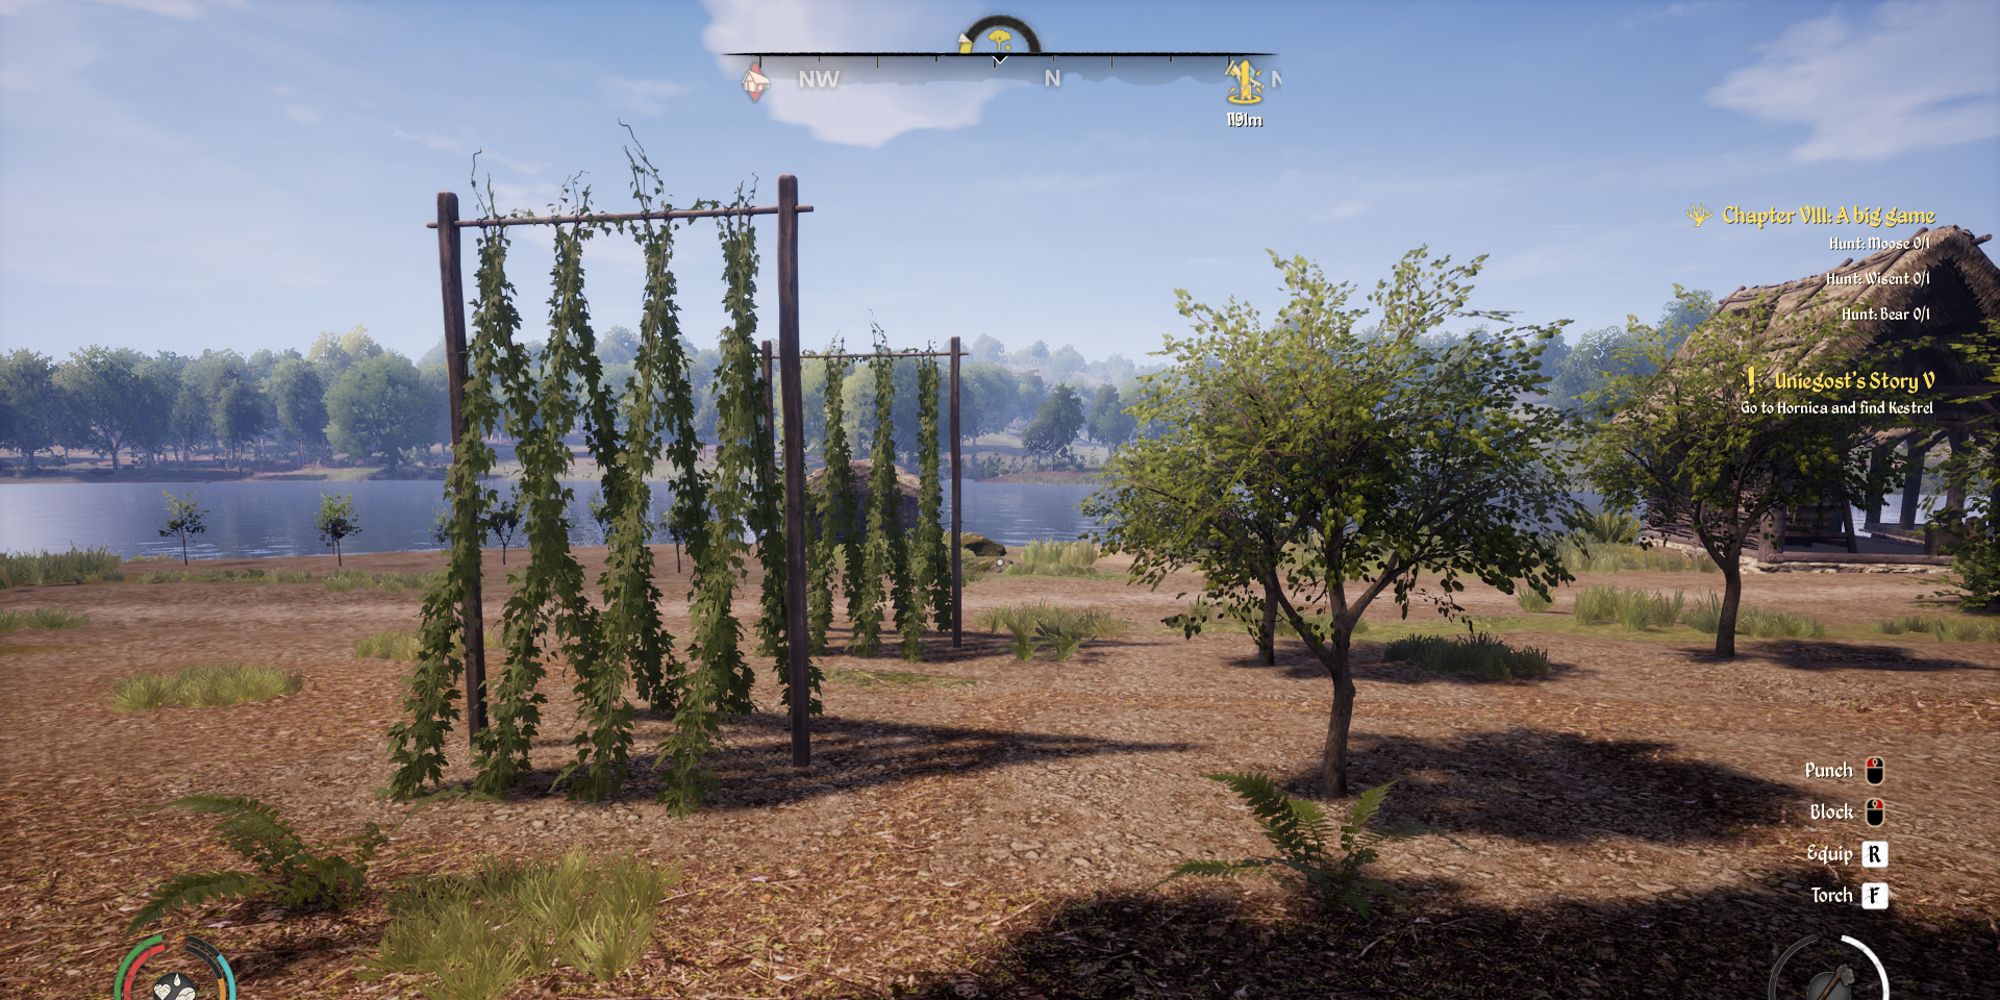 player looking towards orchard with hops and trees growing in a coastal village